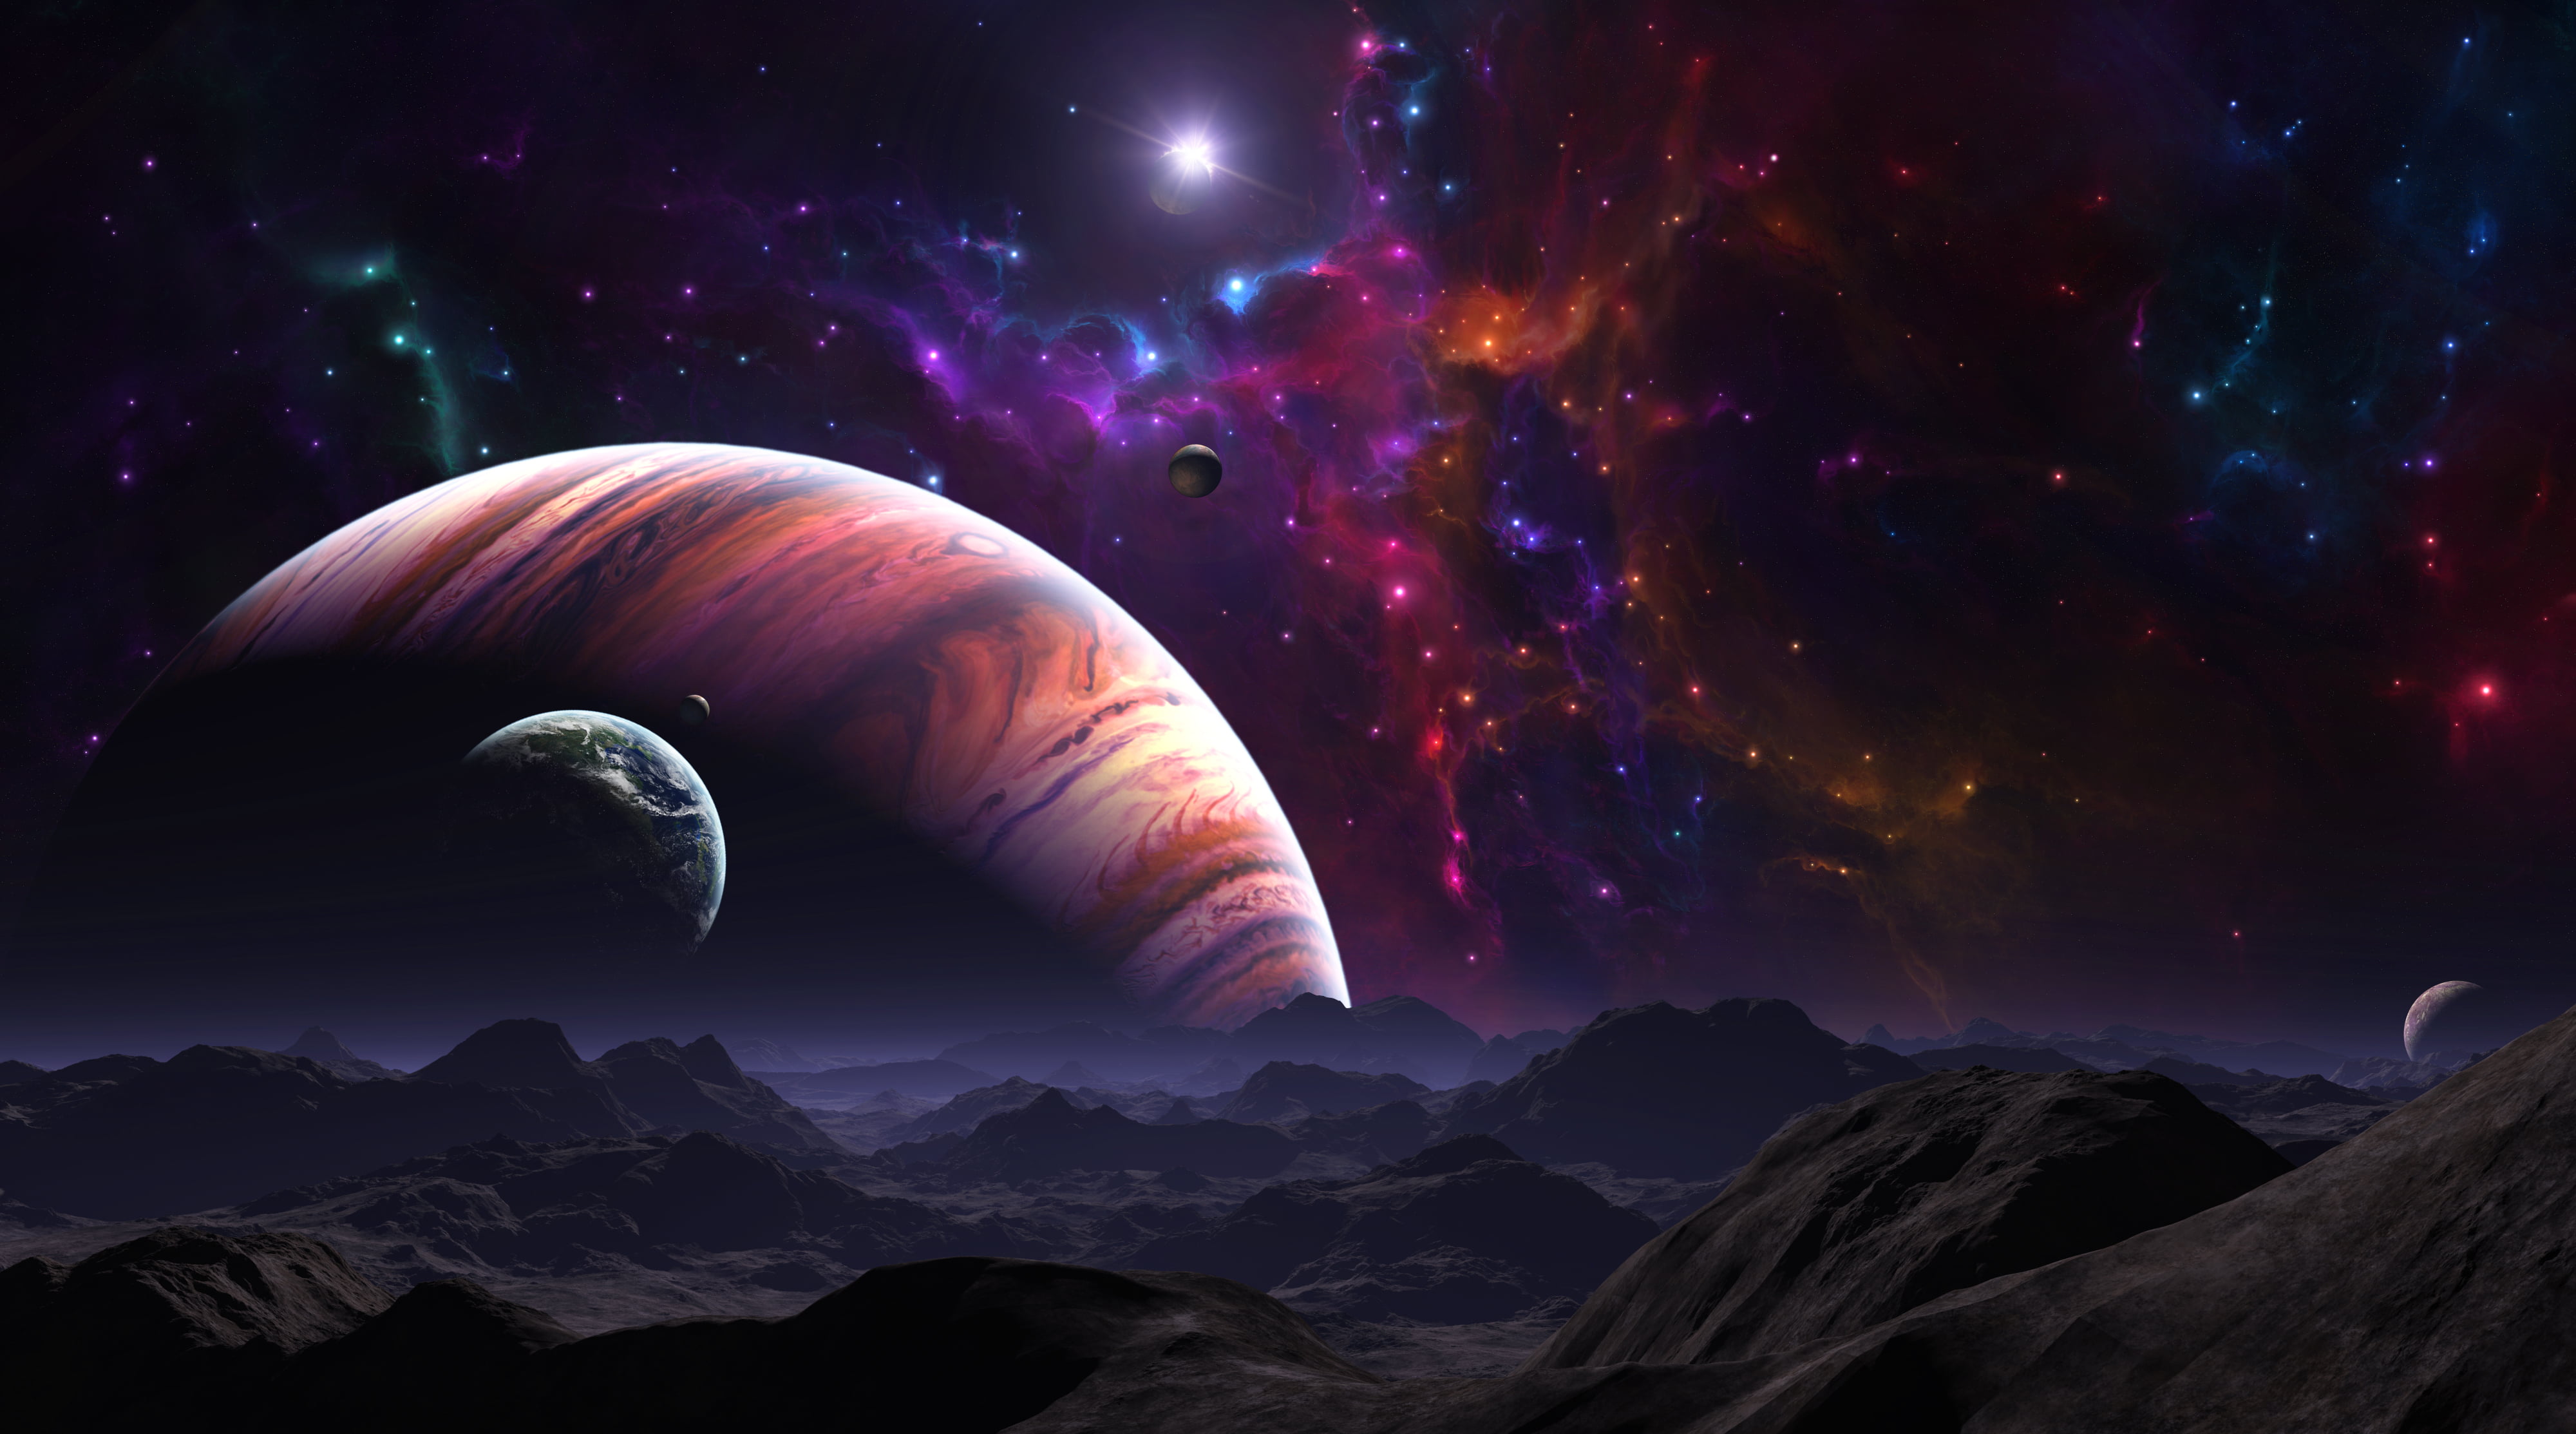 multicolored planet wallpaper, stars, surface, mountains, landscape